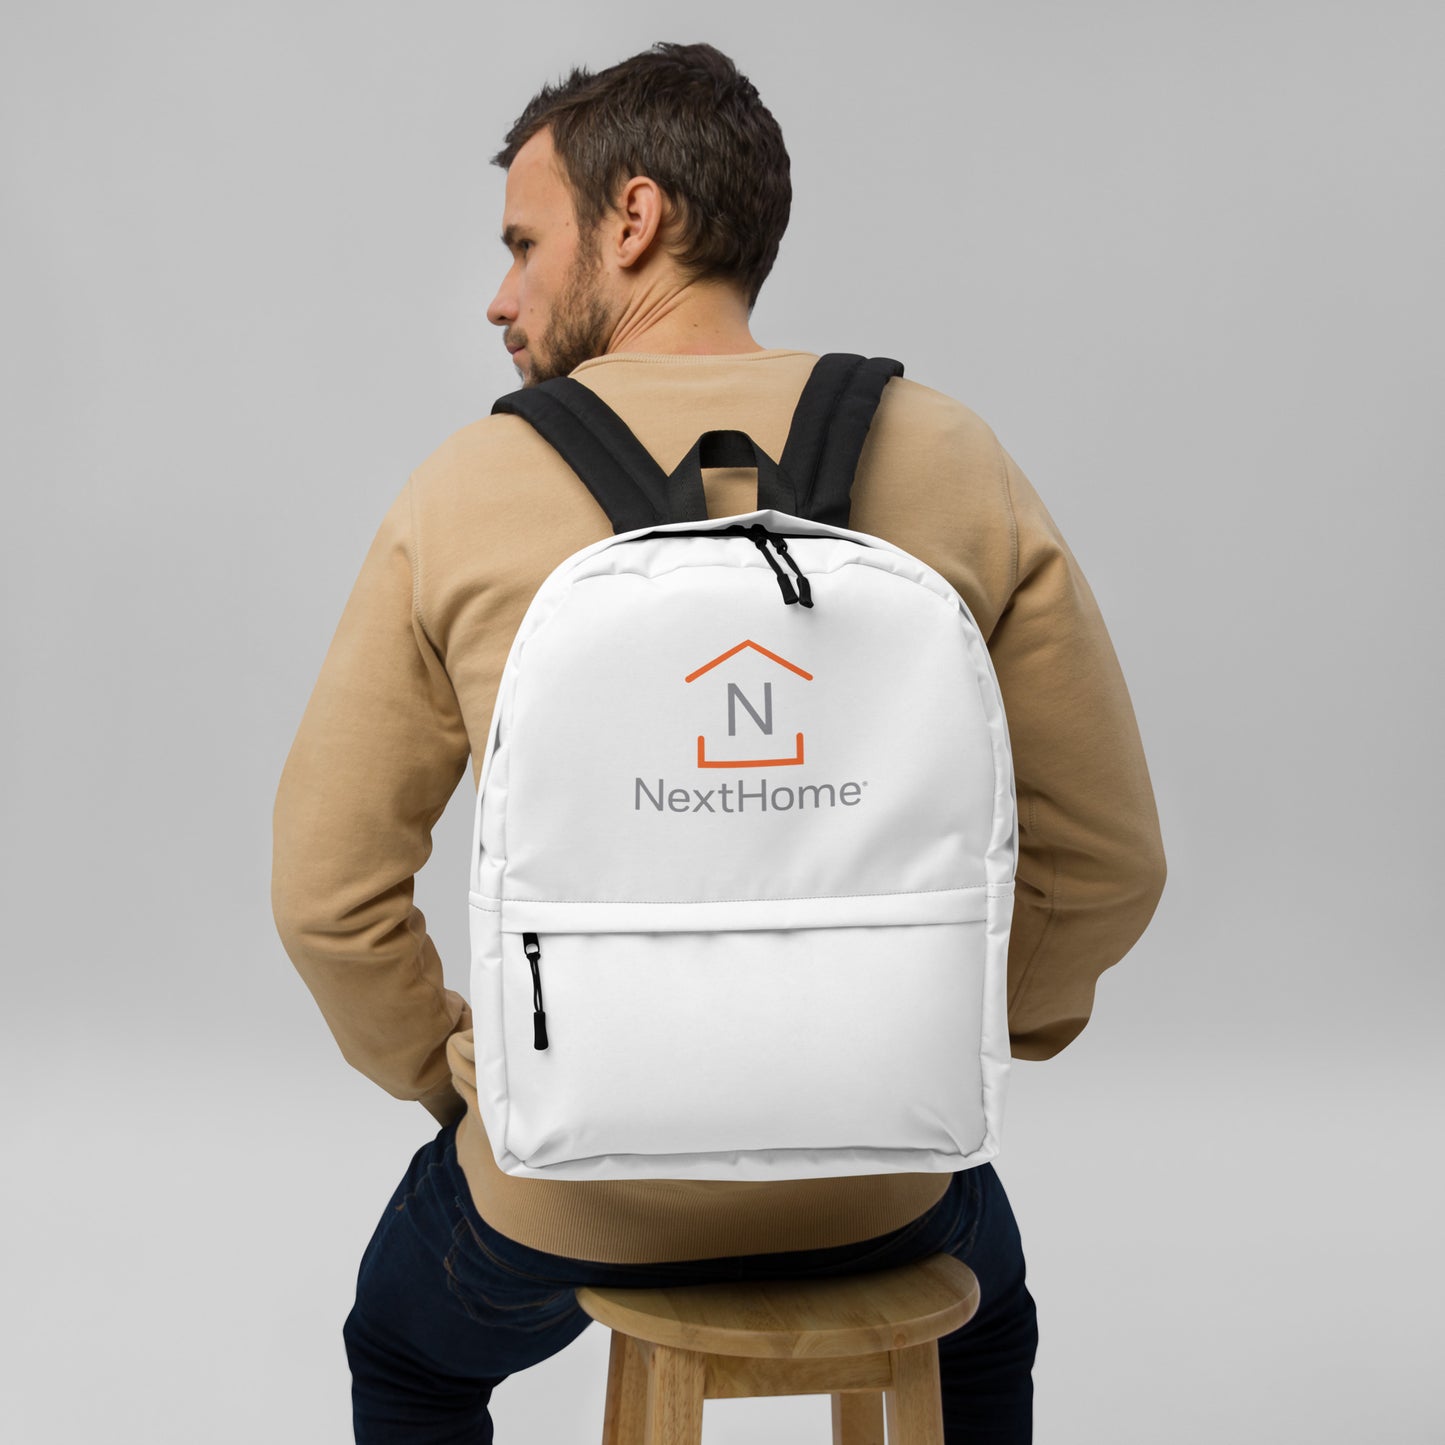 NextHome Front Zipper Backpack